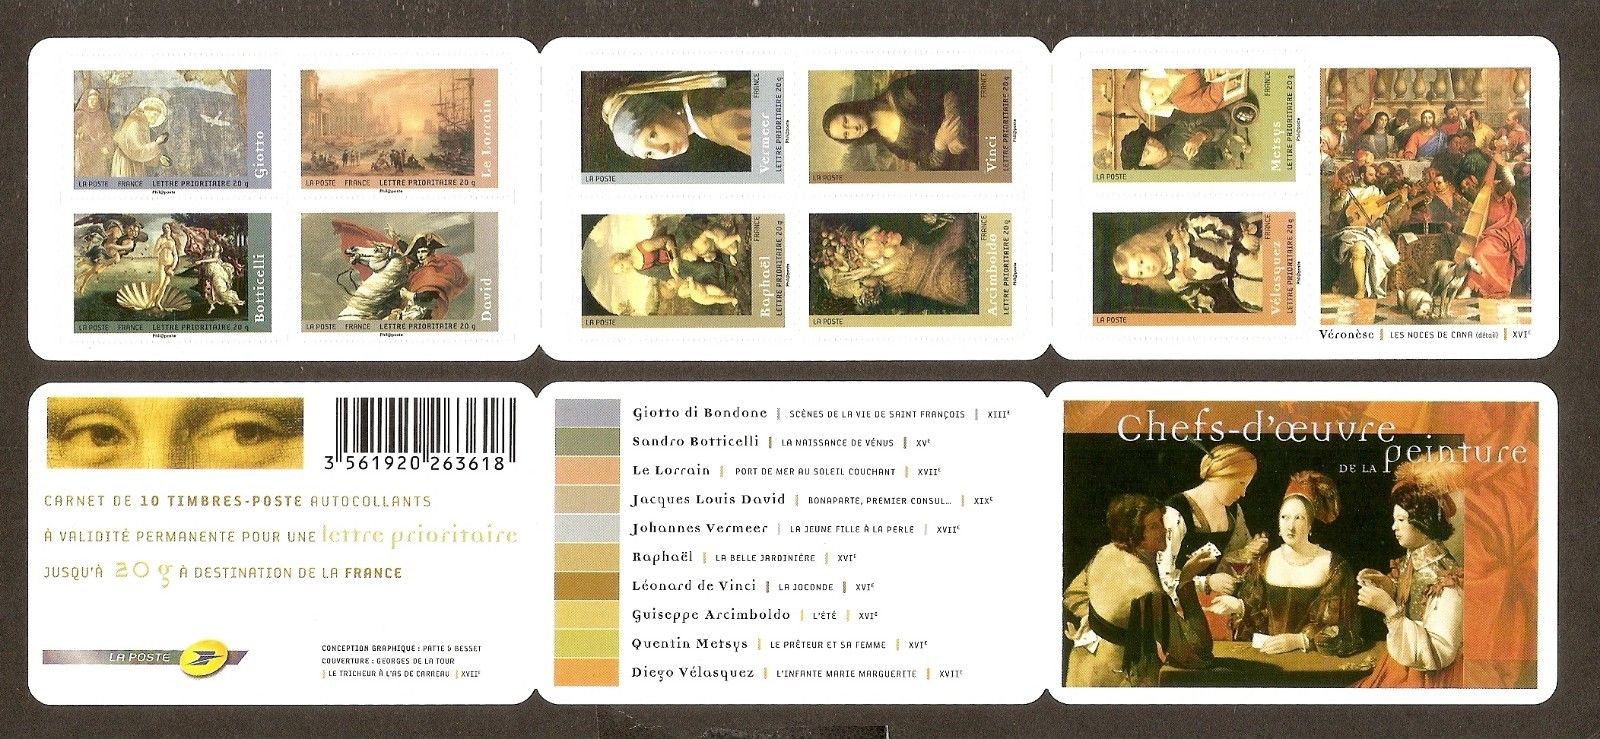 France - Scott #3403a (2008) booklet pane of 10 [NIMC 2019] image sourced from current eBay auction